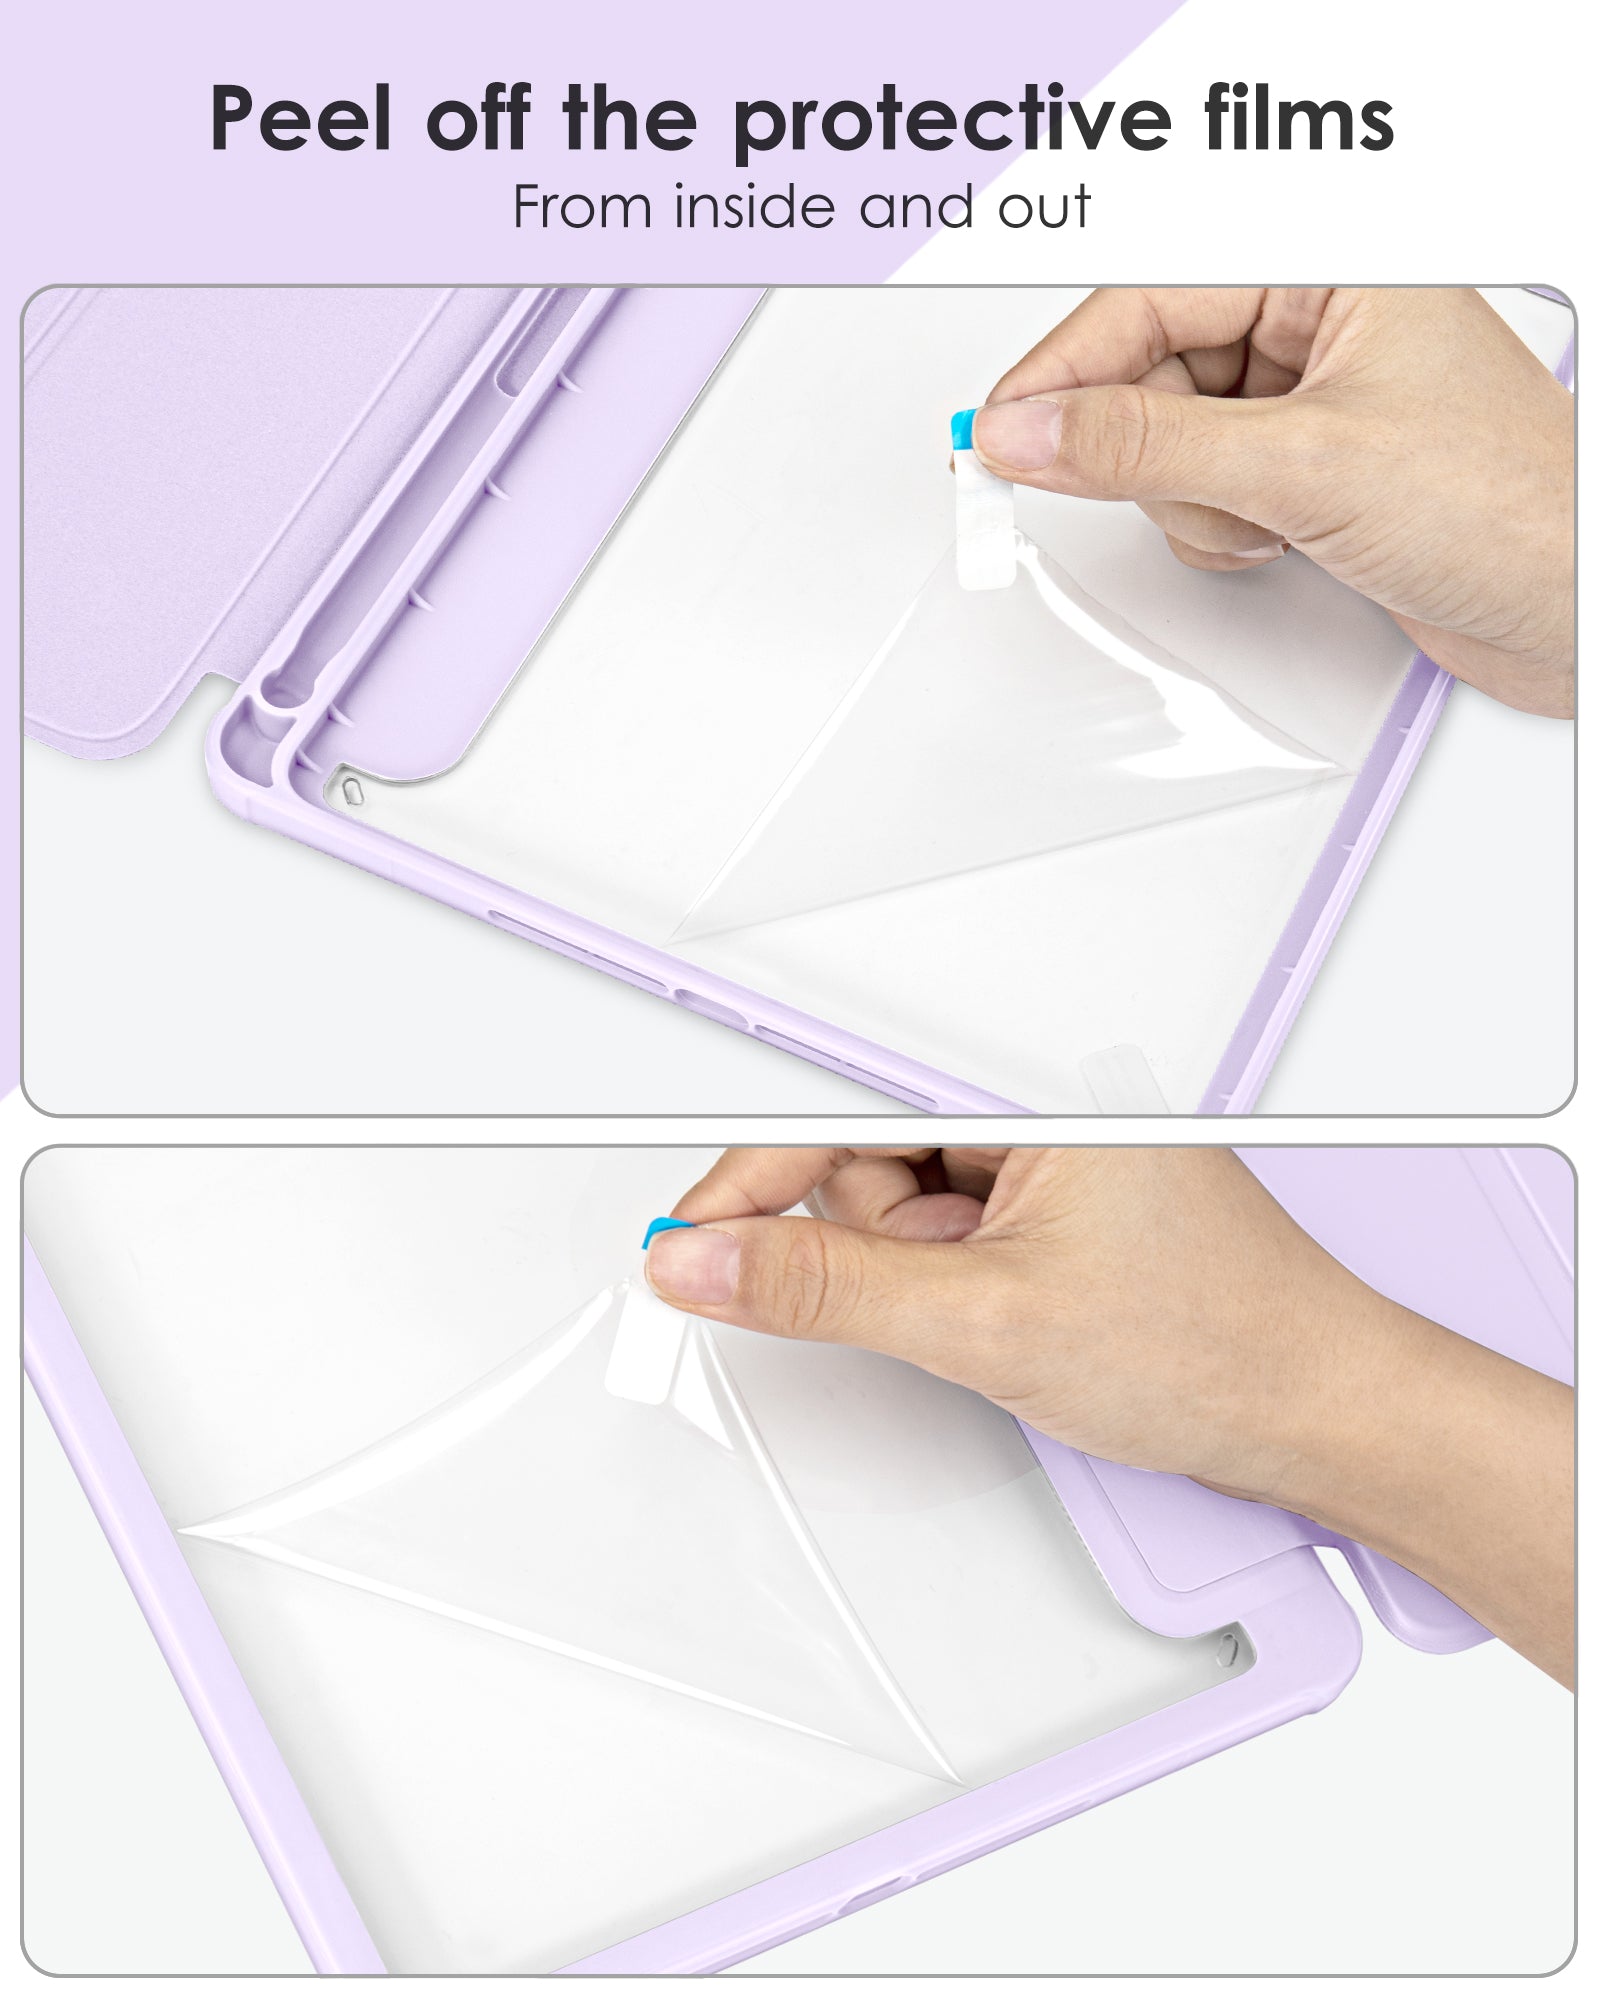 DTTOCASE for iPad 6th / 5th Generation 9.7 inch Case (2018/2017), iPad Air 2 & 1 (2014/2013) Case, Clear Back, Smart Cover [Built-in Pencil Holder, Auto Sleep/Wake] - Rose Gold